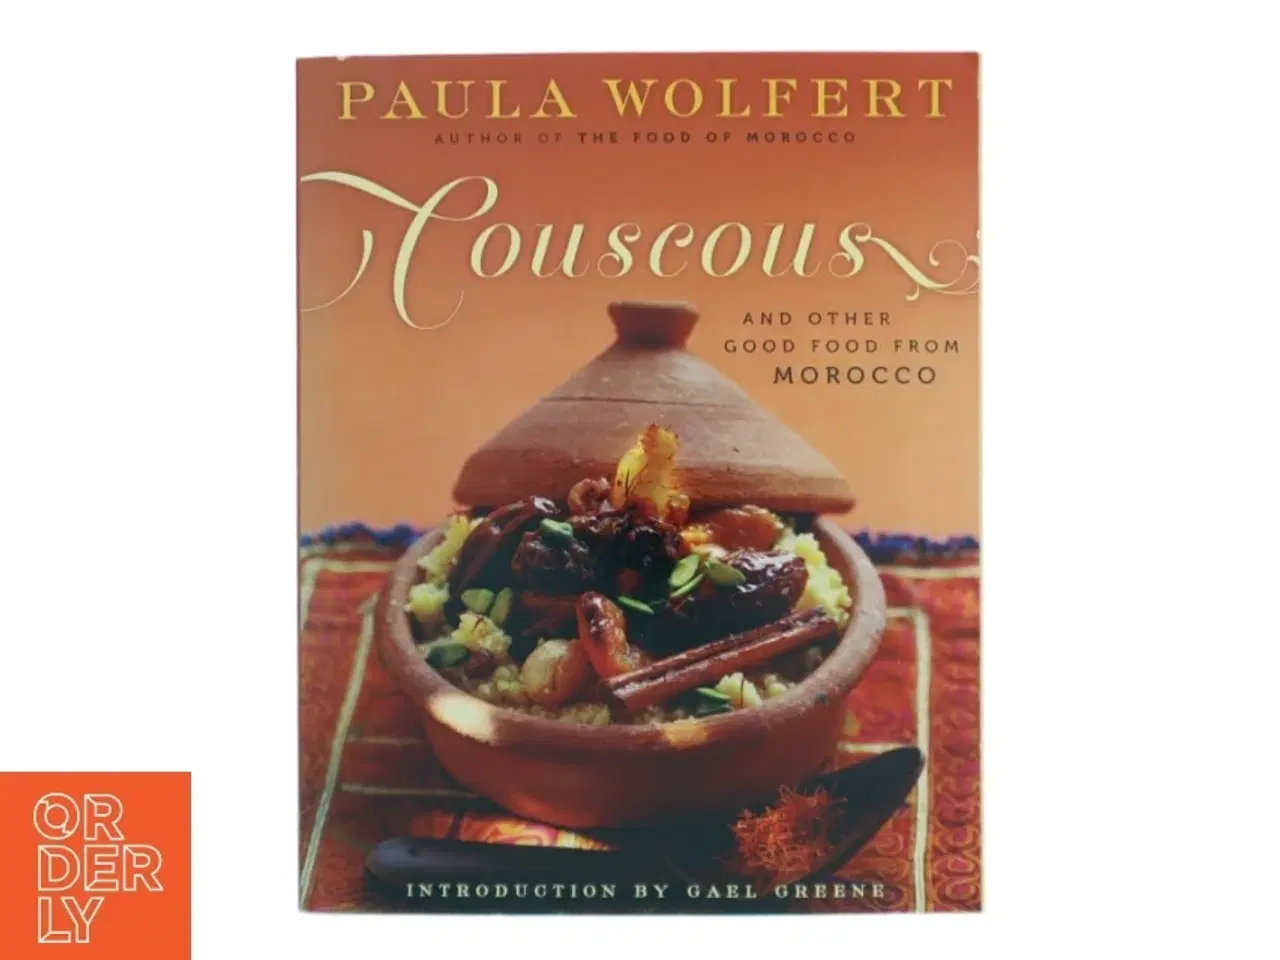 Billede 1 - Couscous and Other Good Food from Morocco af Paula Wolfert (Bog)